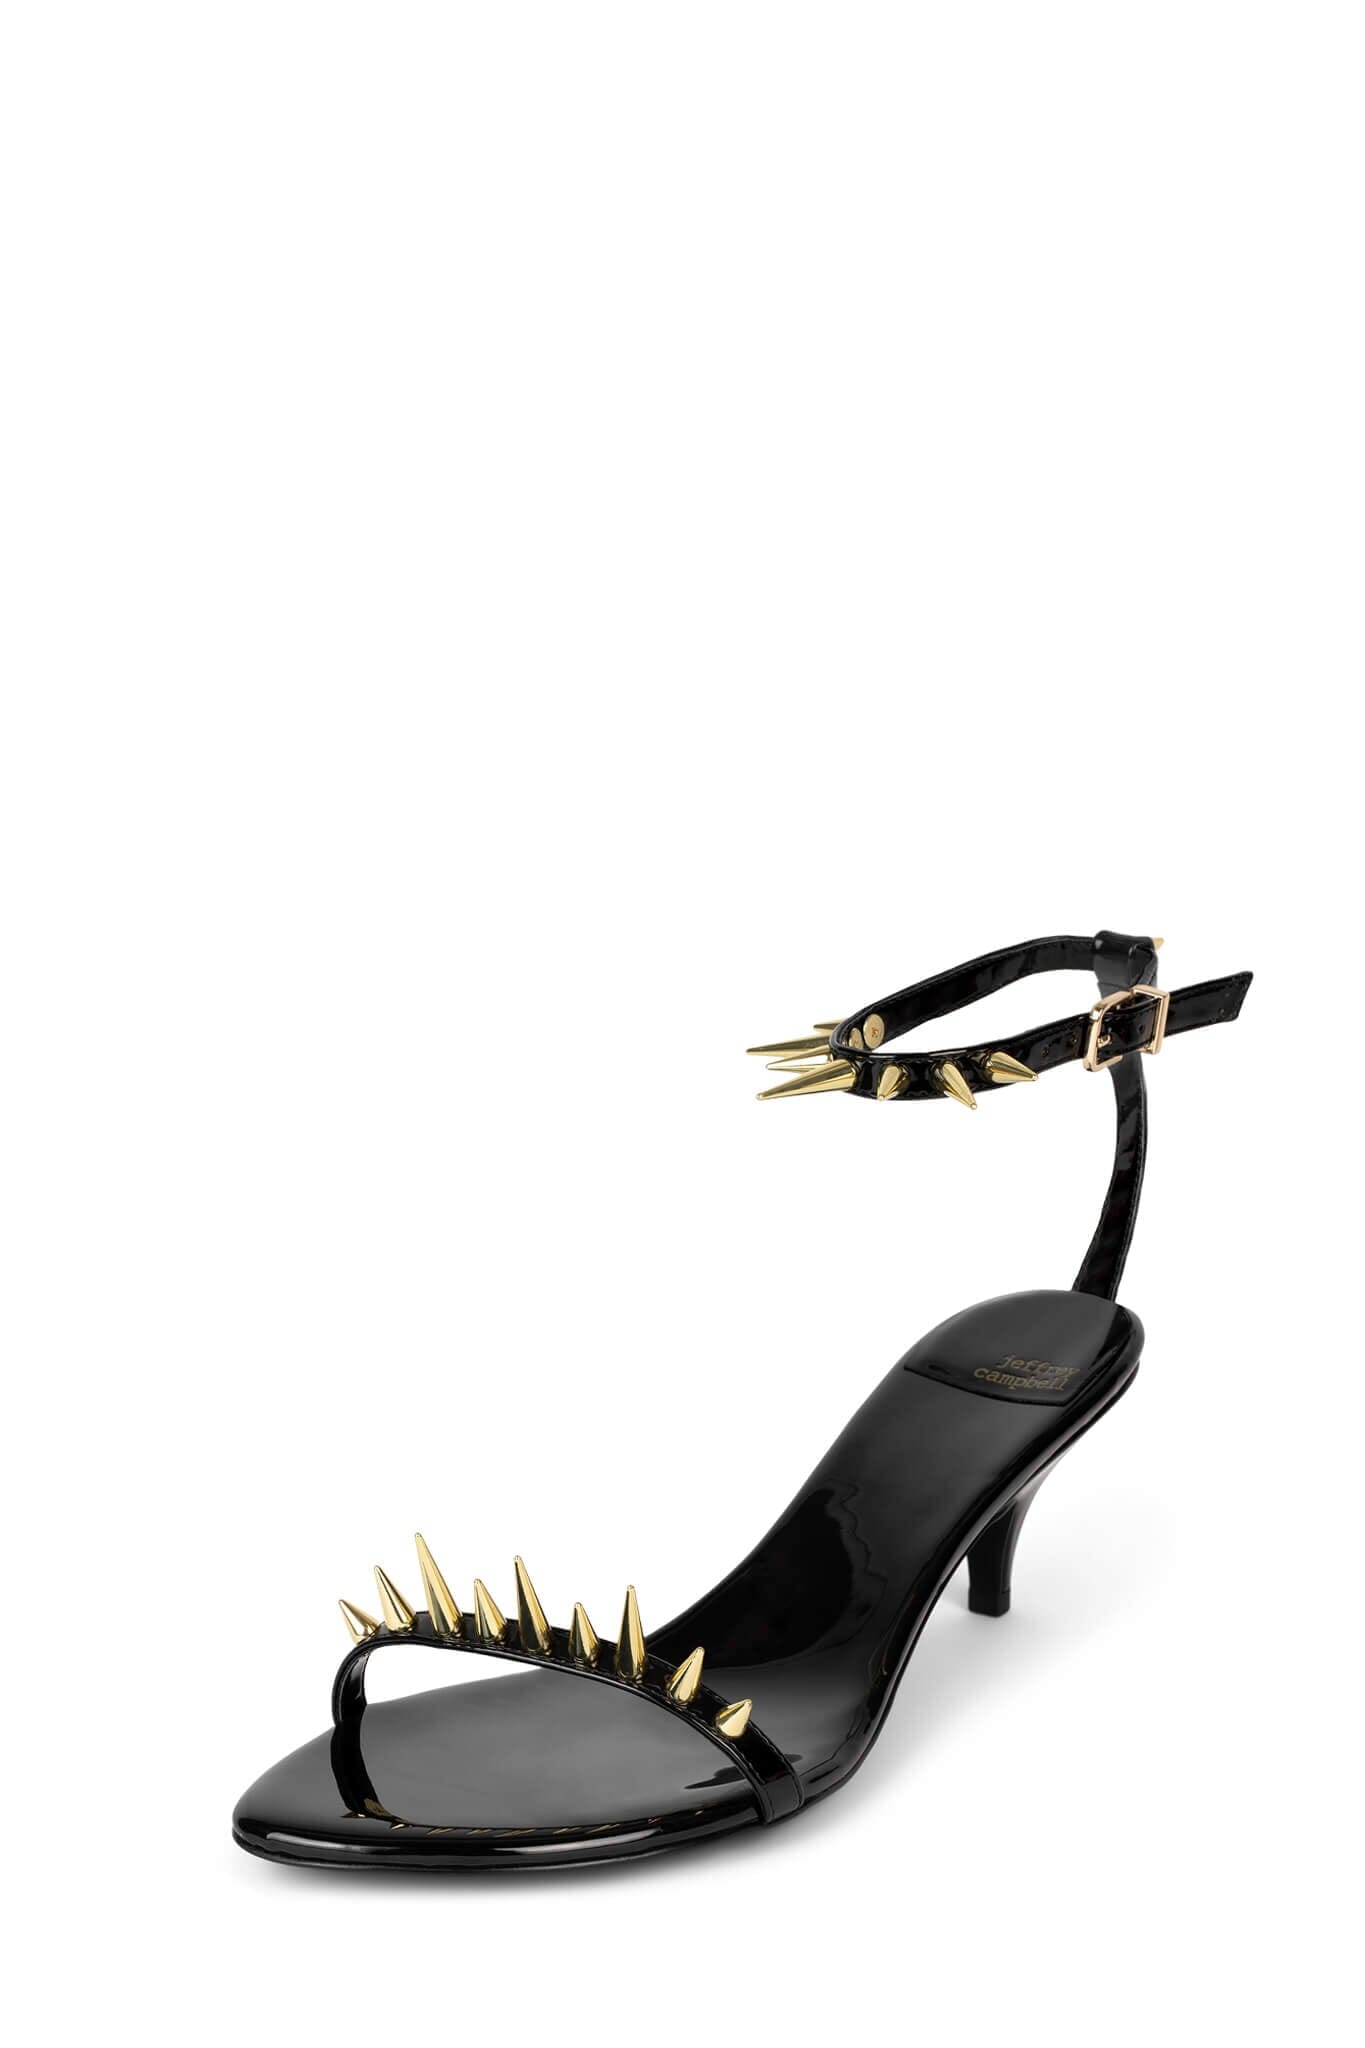 Stylish Mirror Leather Studded Spike T Strap Pumps With Ankle Strap For  Summer Brides Includes Box From Movement125, $58.61 | DHgate.Com